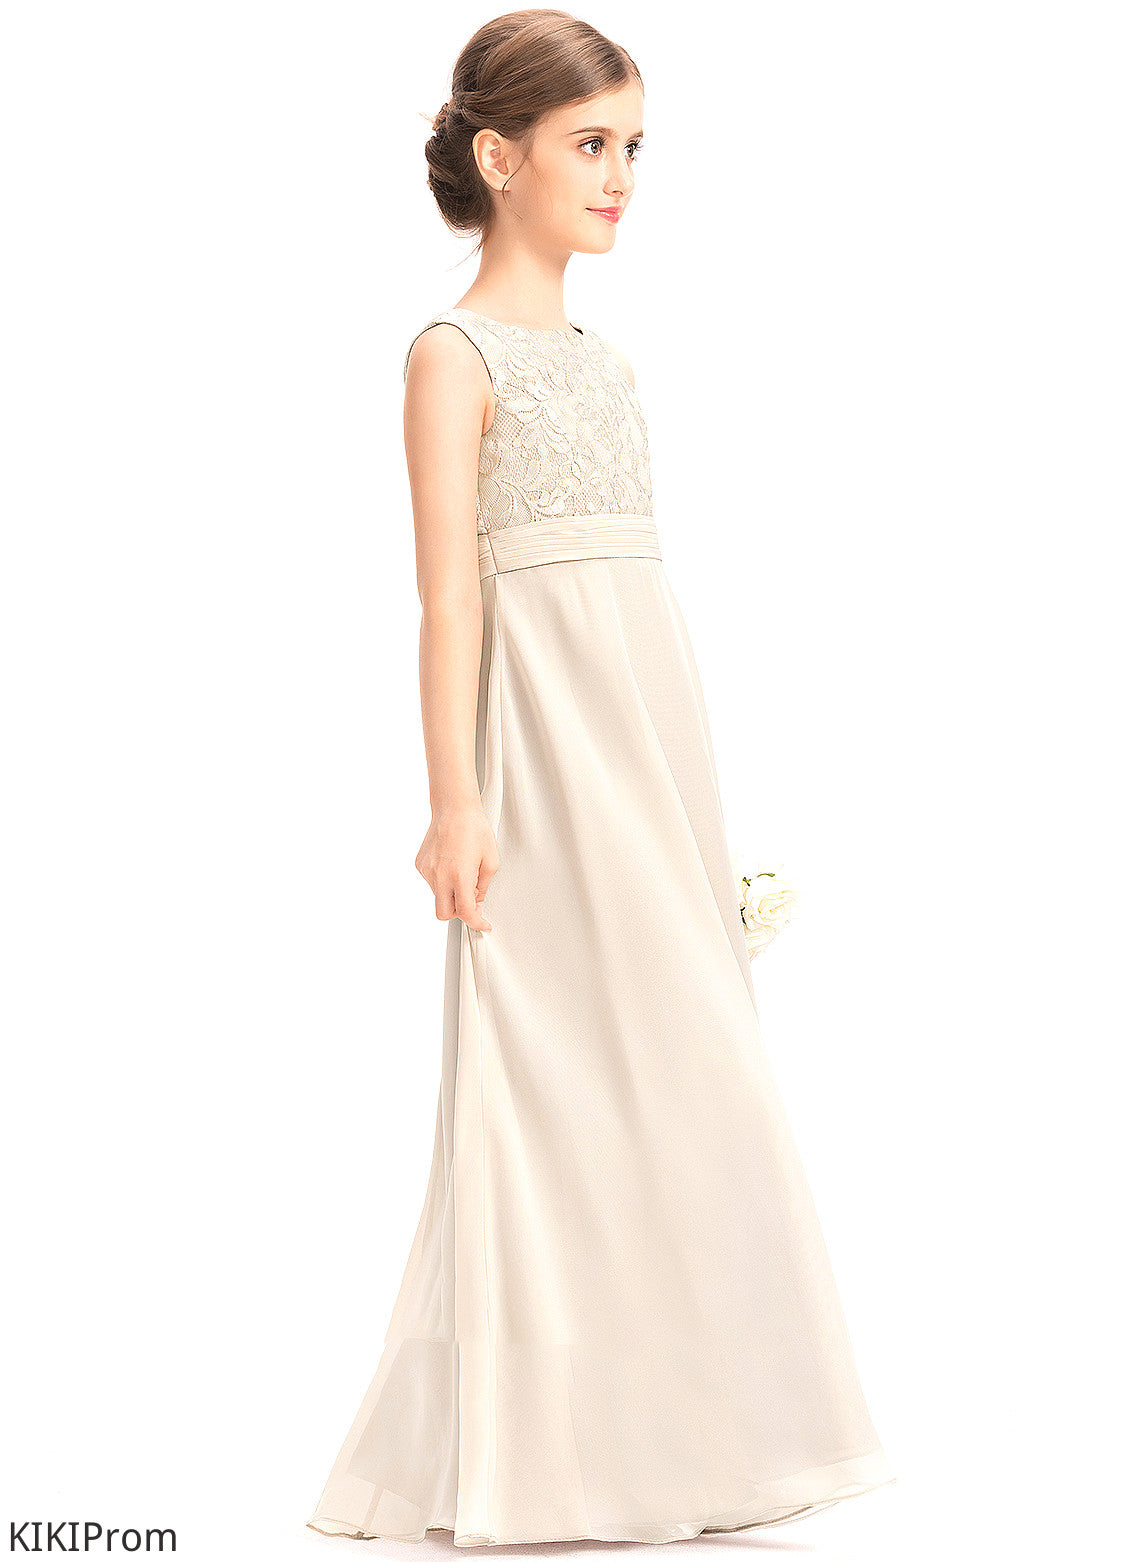 Junior Bridesmaid Dresses Lace Paisley A-Line Scoop Ruffle Neck With Chiffon Floor-Length